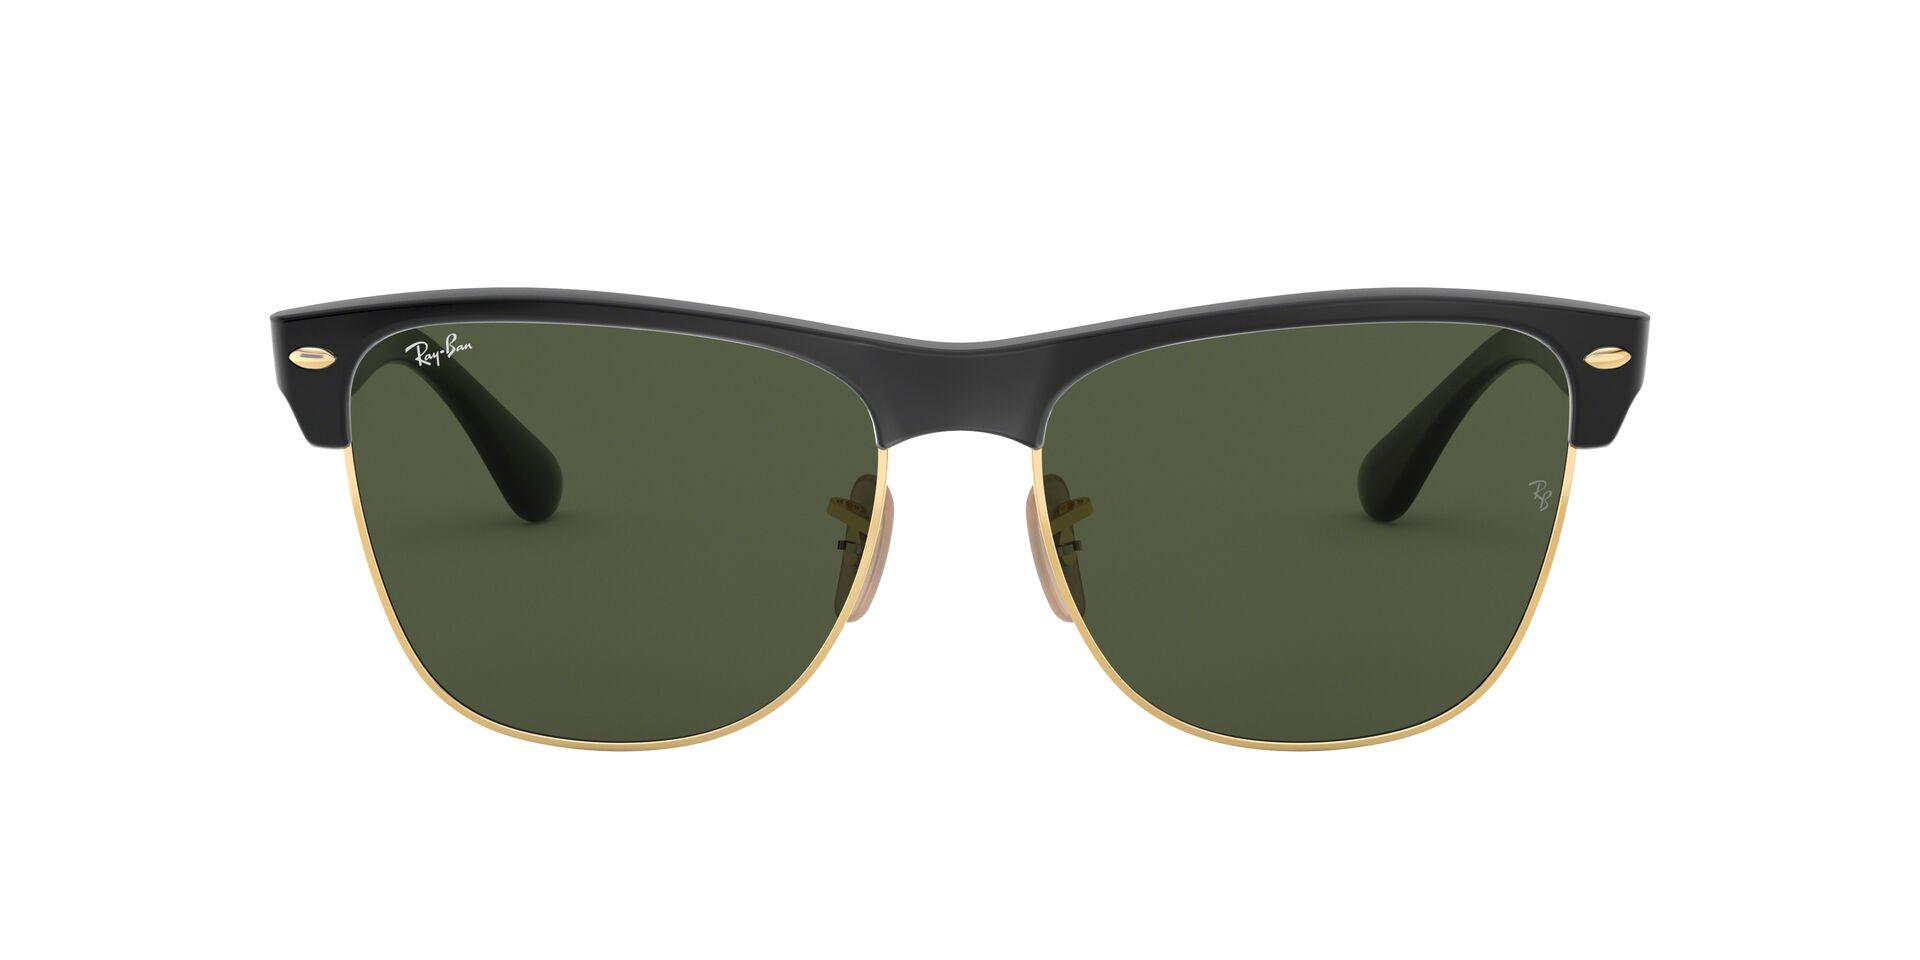 Mắt Kính Ray-Ban Clumaster Oversized - RB4175 877 -Sunglasses